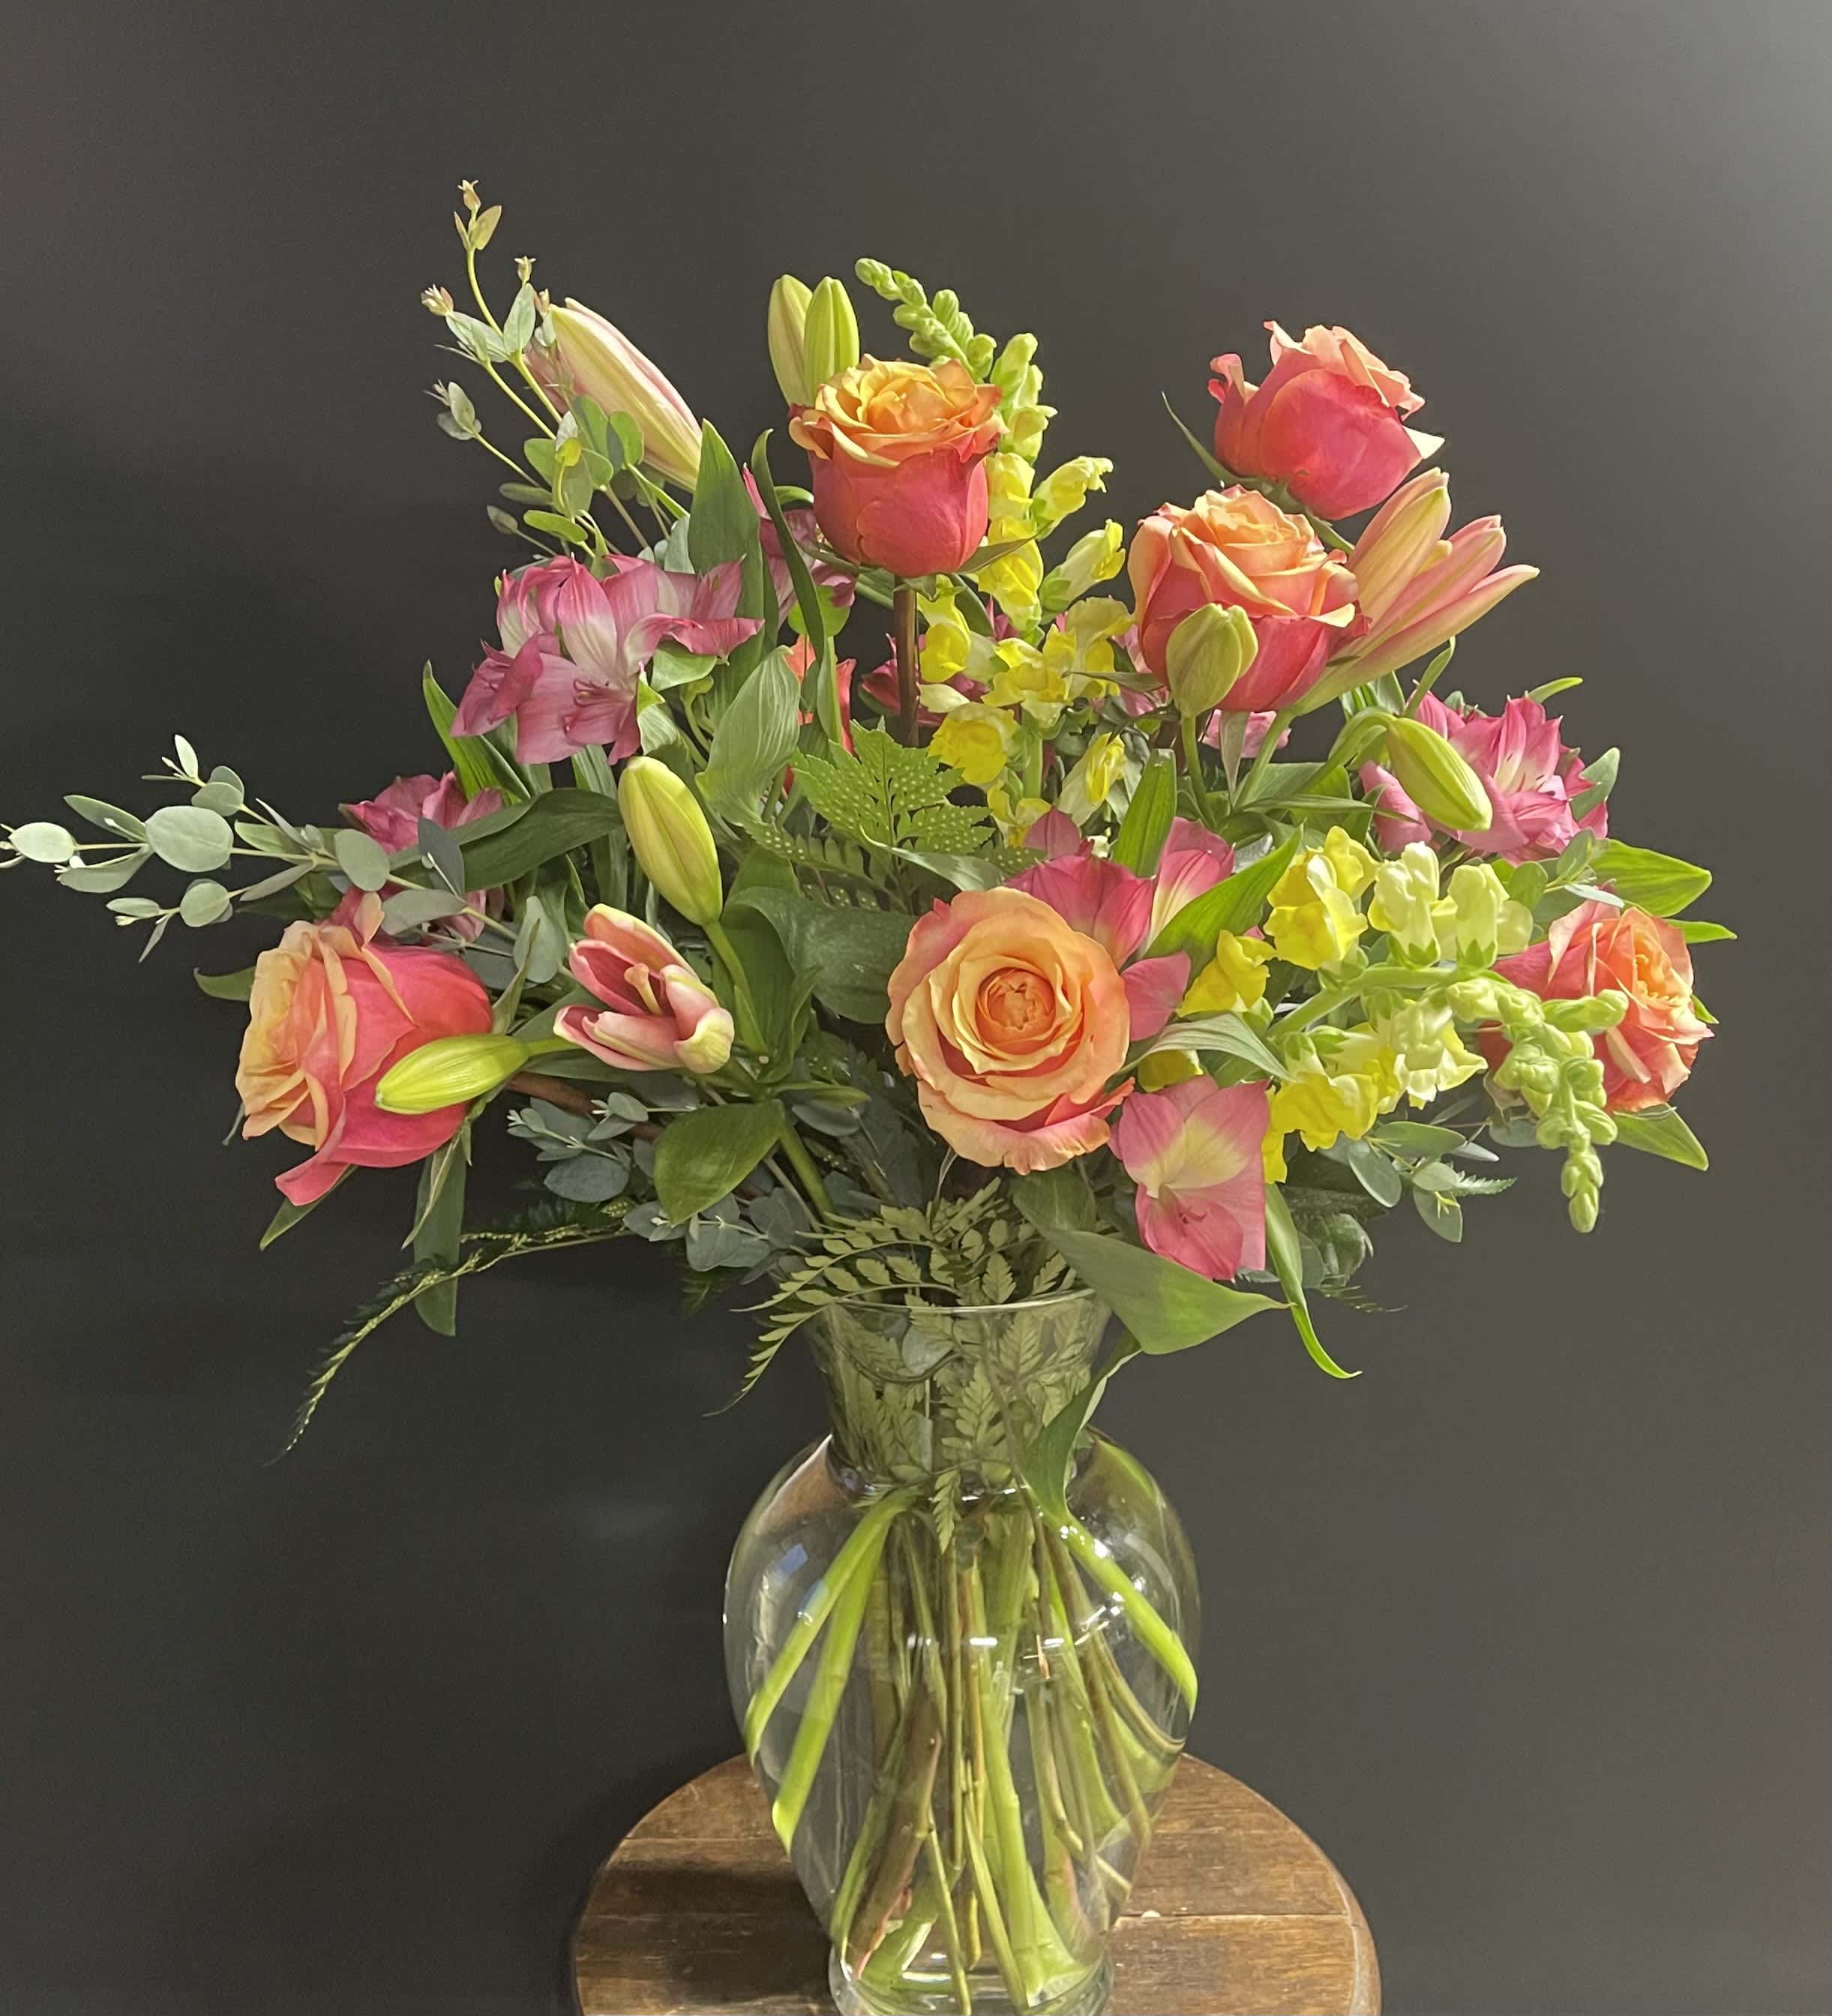 Orange Sherbet Bouquet - Beautiful bi-color roses in orange to dark pink paired with yellow snapdragons, pink asiatic lilies, and pink alstromeria.